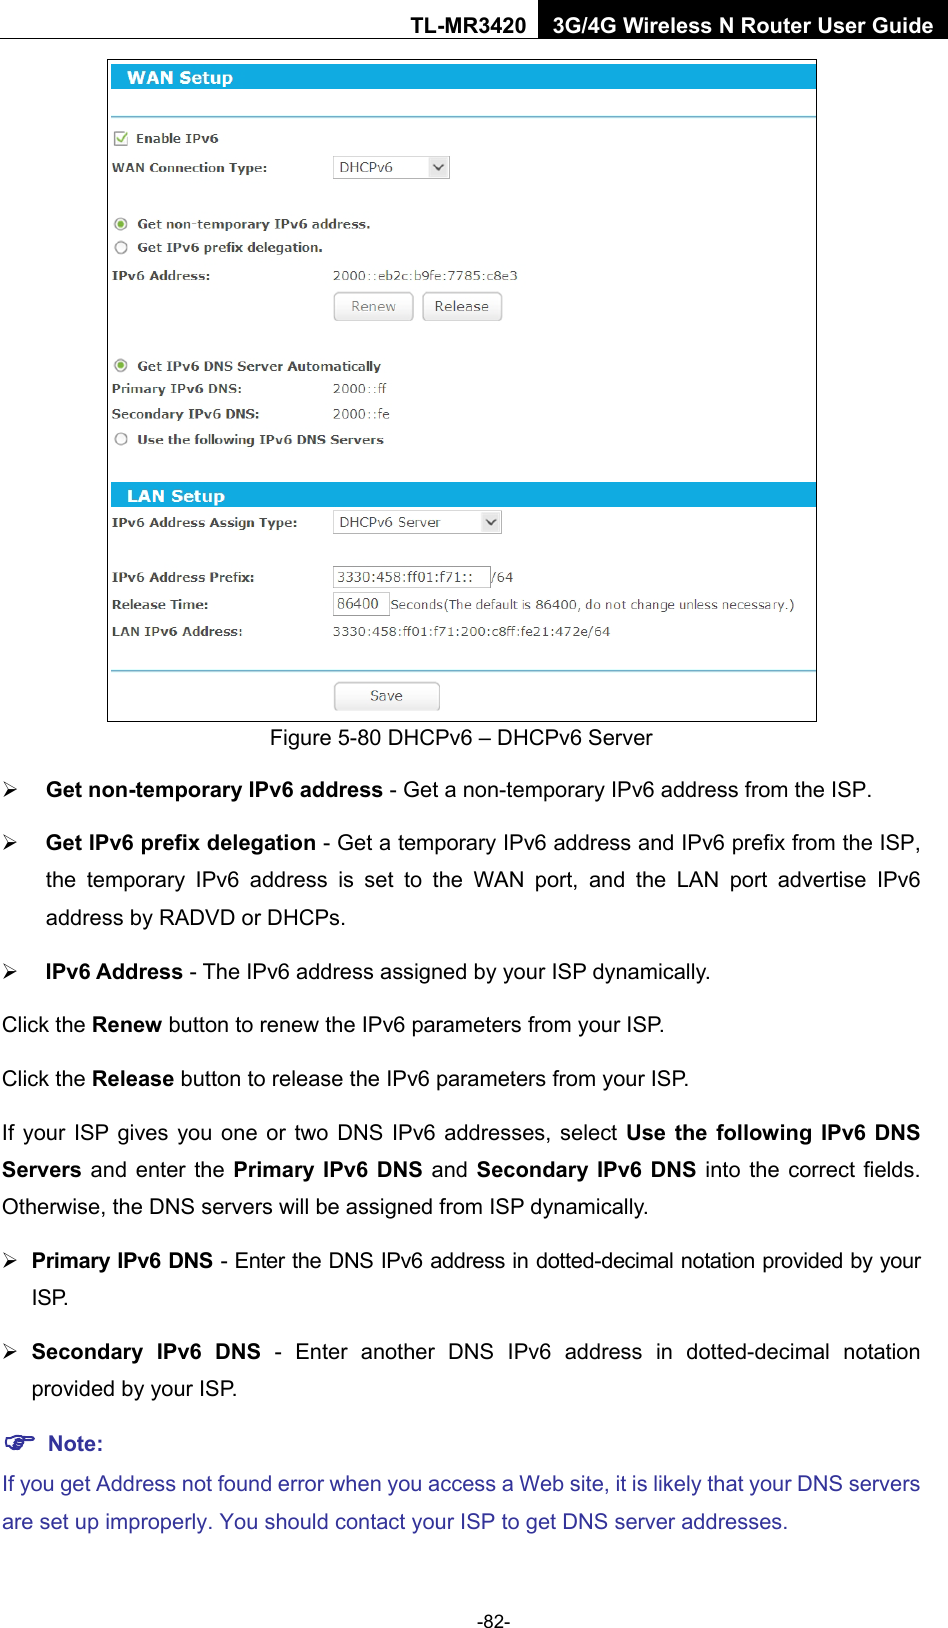    -82- TL-MR3420 3G/4G Wireless N Router User Guide  Figure 5-80 DHCPv6 – DHCPv6 Server  Get non-temporary IPv6 address - Get a non-temporary IPv6 address from the ISP.  Get IPv6 prefix delegation - Get a temporary IPv6 address and IPv6 prefix from the ISP, the temporary IPv6 address is set to the WAN port, and the LAN port advertise IPv6 address by RADVD or DHCPs.  IPv6 Address - The IPv6 address assigned by your ISP dynamically. Click the Renew button to renew the IPv6 parameters from your ISP.   Click the Release button to release the IPv6 parameters from your ISP.   If your ISP gives you one or two DNS IPv6 addresses, select Use the following IPv6 DNS Servers and enter the Primary IPv6 DNS and  Secondary IPv6 DNS into the correct fields. Otherwise, the DNS servers will be assigned from ISP dynamically.  Primary IPv6 DNS - Enter the DNS IPv6 address in dotted-decimal notation provided by your I S P.   Secondary IPv6 DNS - Enter another DNS IPv6 address in dotted-decimal notation provided by your ISP.  Note: If you get Address not found error when you access a Web site, it is likely that your DNS servers are set up improperly. You should contact your ISP to get DNS server addresses. 